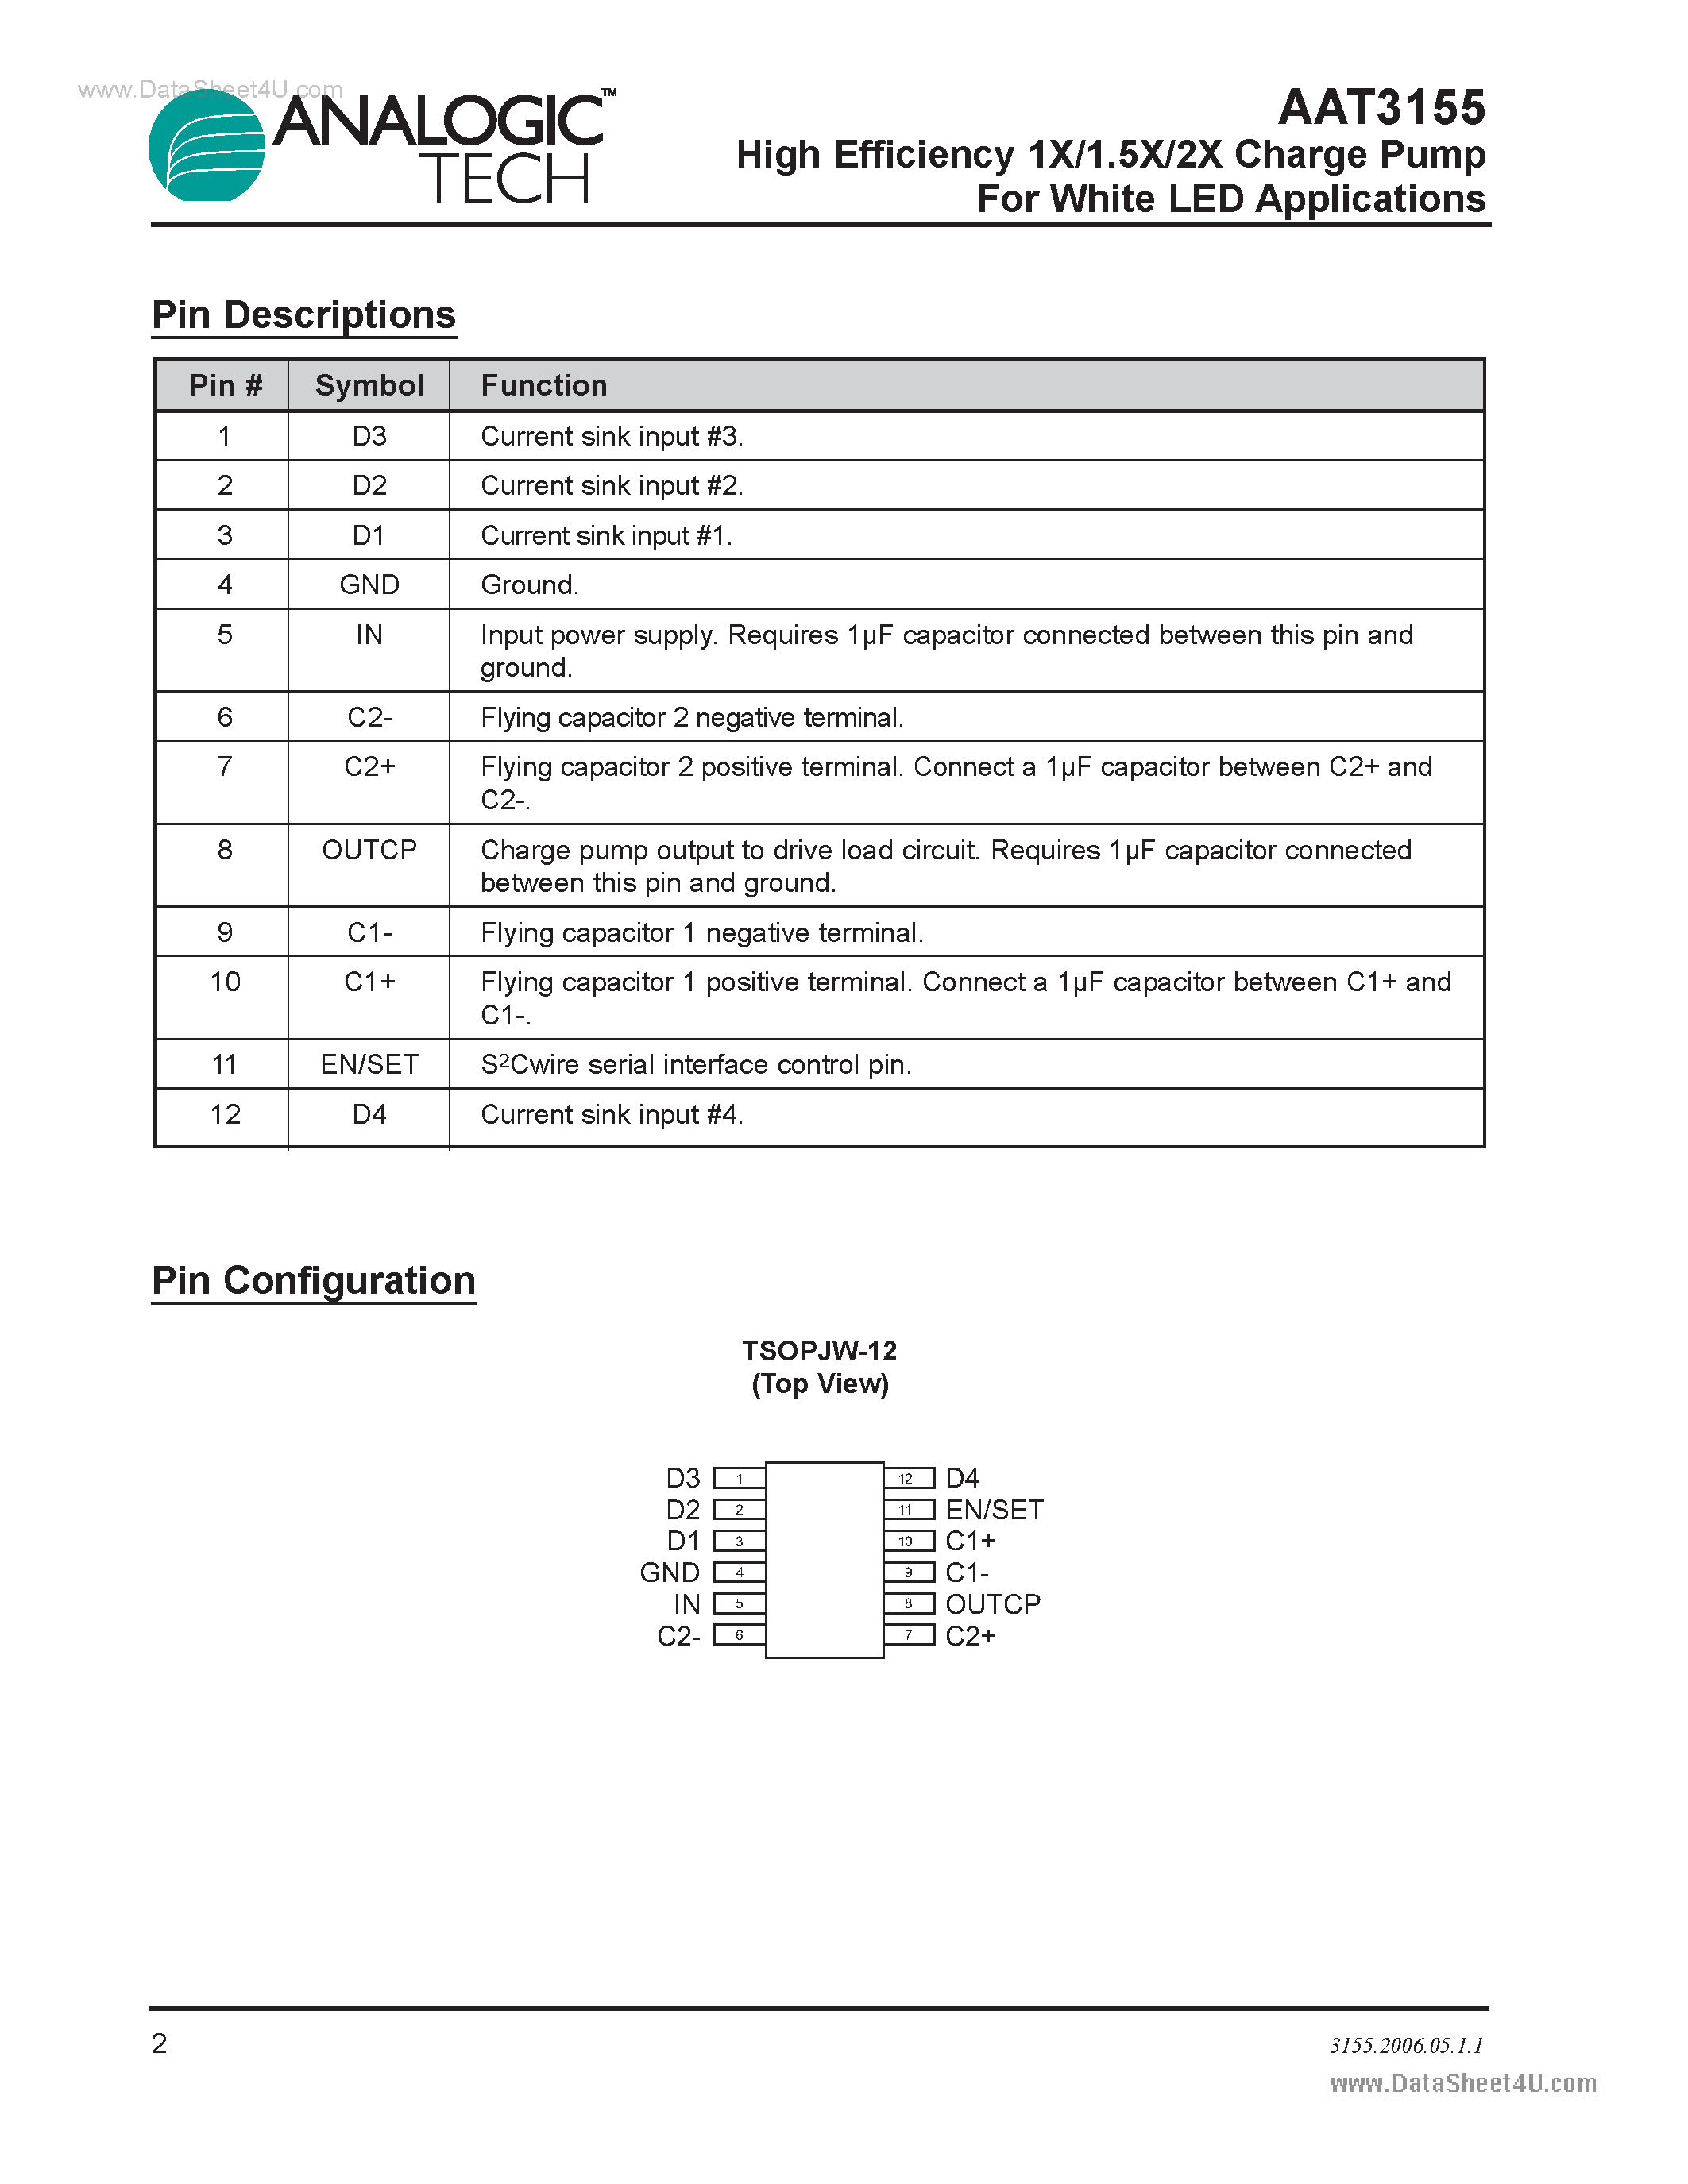 Datasheet AAT3155 - High Efficiency 1X/1.5X/2X Charge Pump page 2